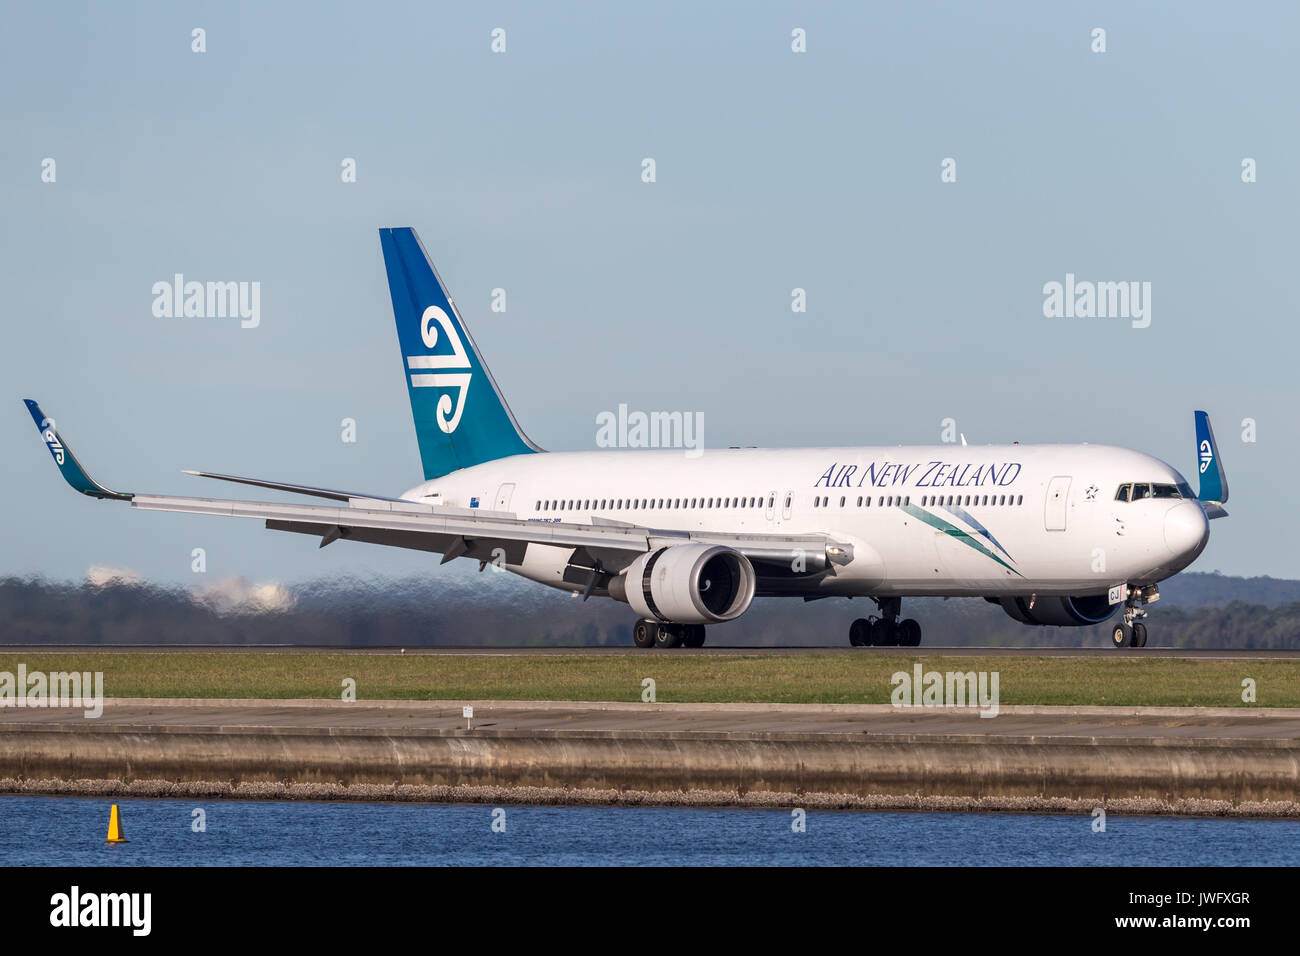 Air New Zealand Boeing 767 Landing at Sydney Airport. Stock Photo